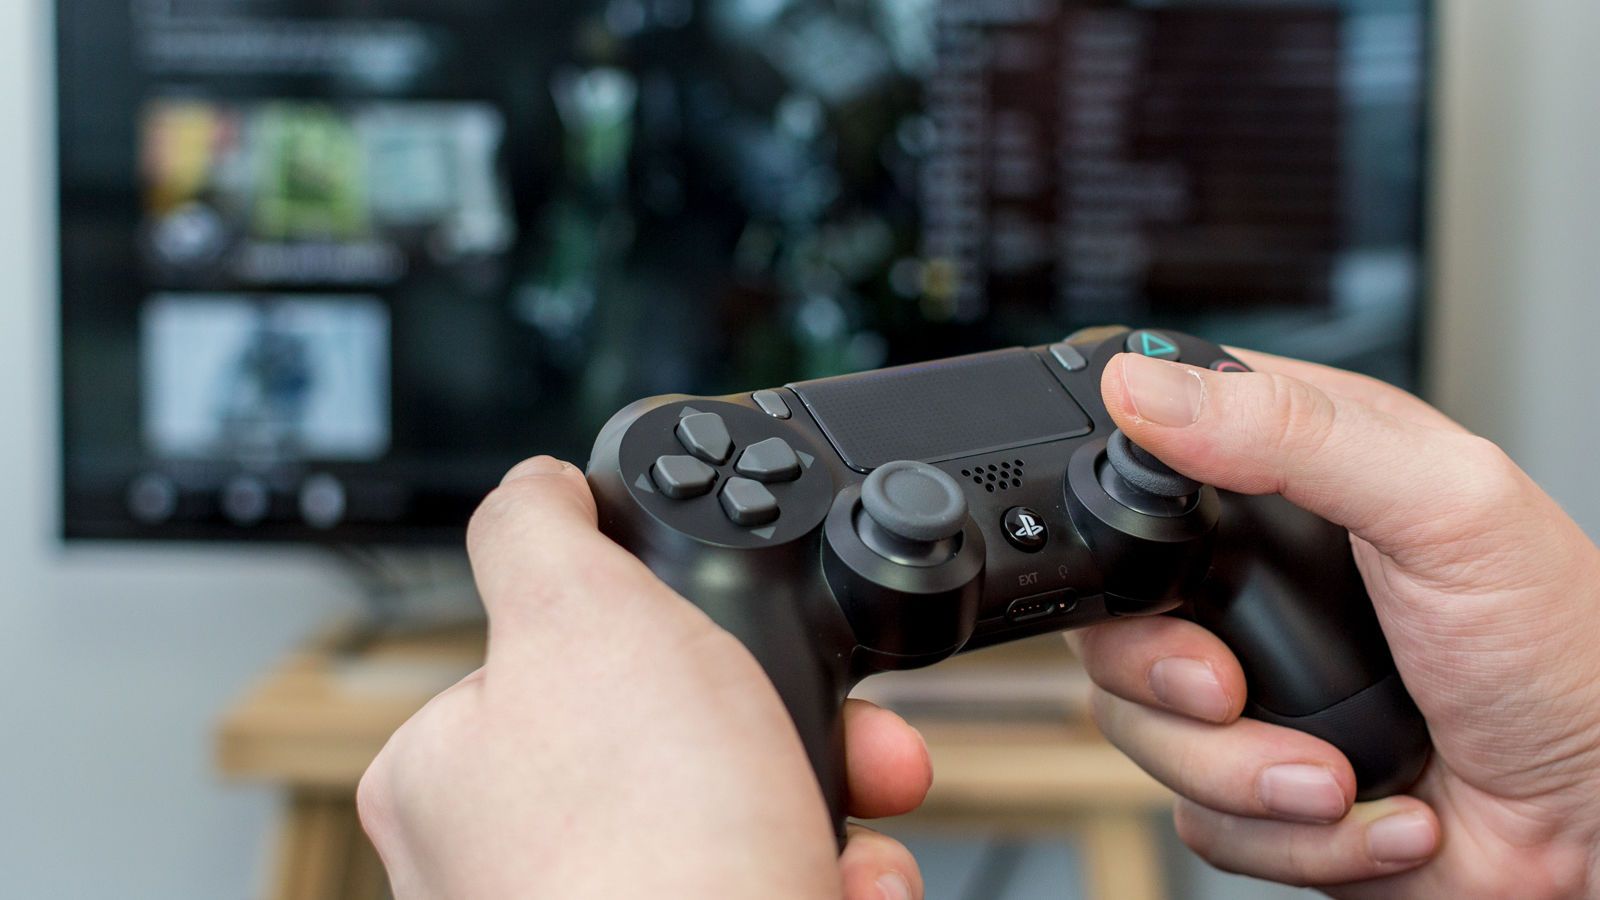 You Play PS3 Games on a PS4? - The Tech Edvocate